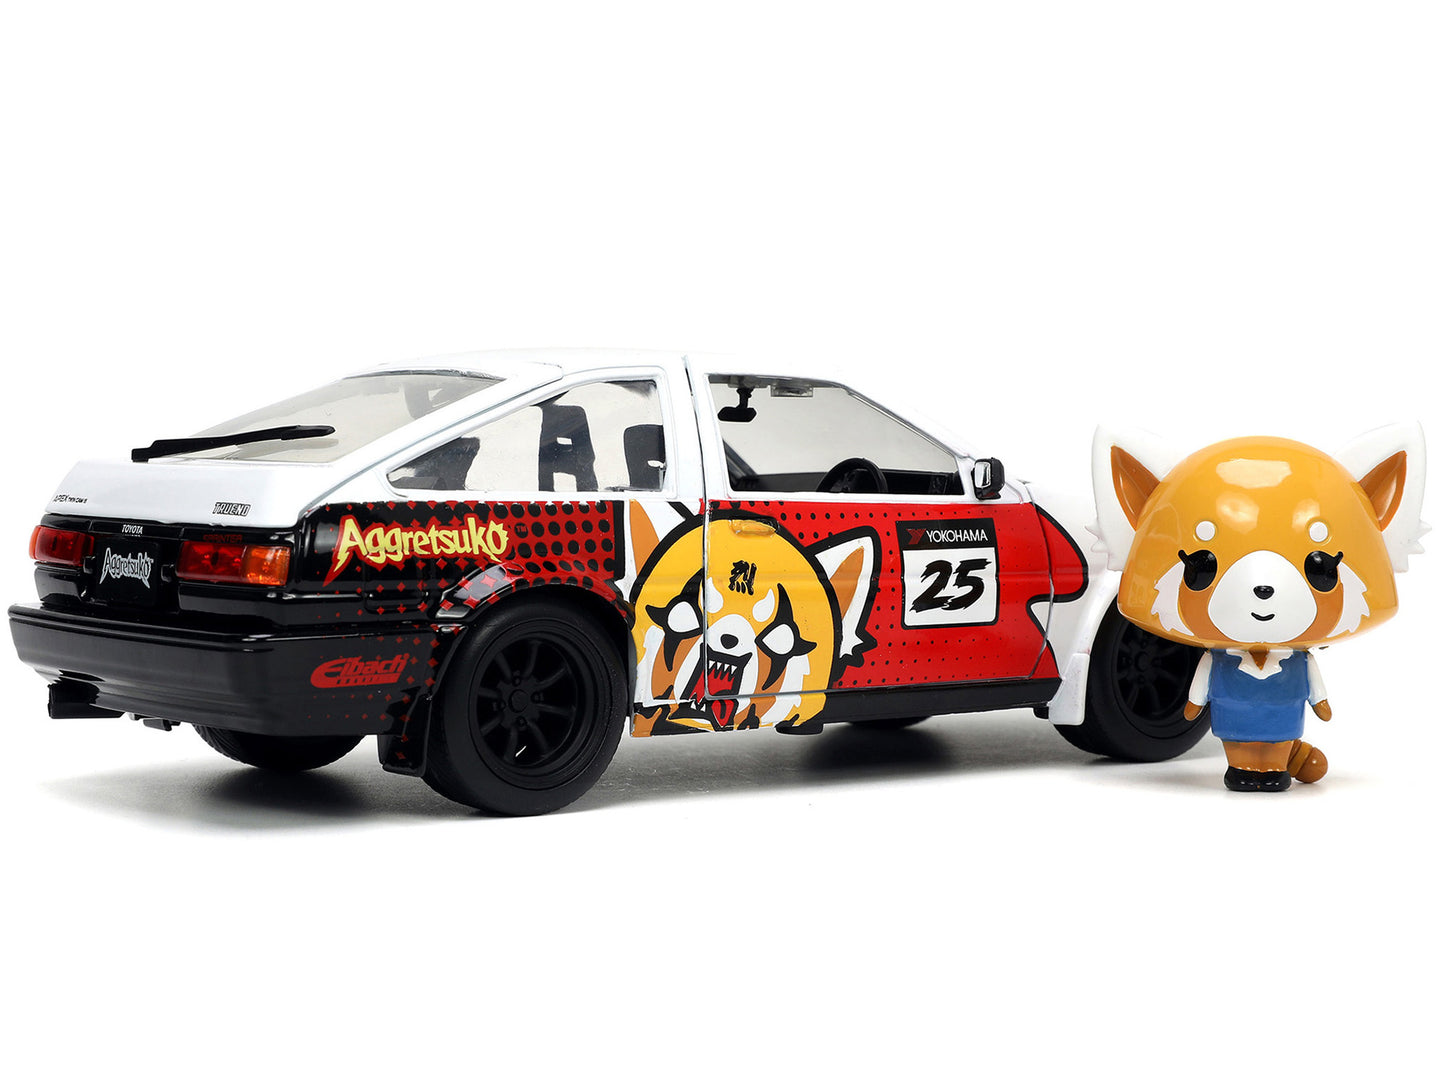 1986 Toyota Trueno (AE86) RHD (Right Hand Drive) #25 White with Graphics and Aggretsuko Diecast Figure "Aggretsuko" "Anime Hollywood Rides" Series 1/24 Diecast Model Car by Jada